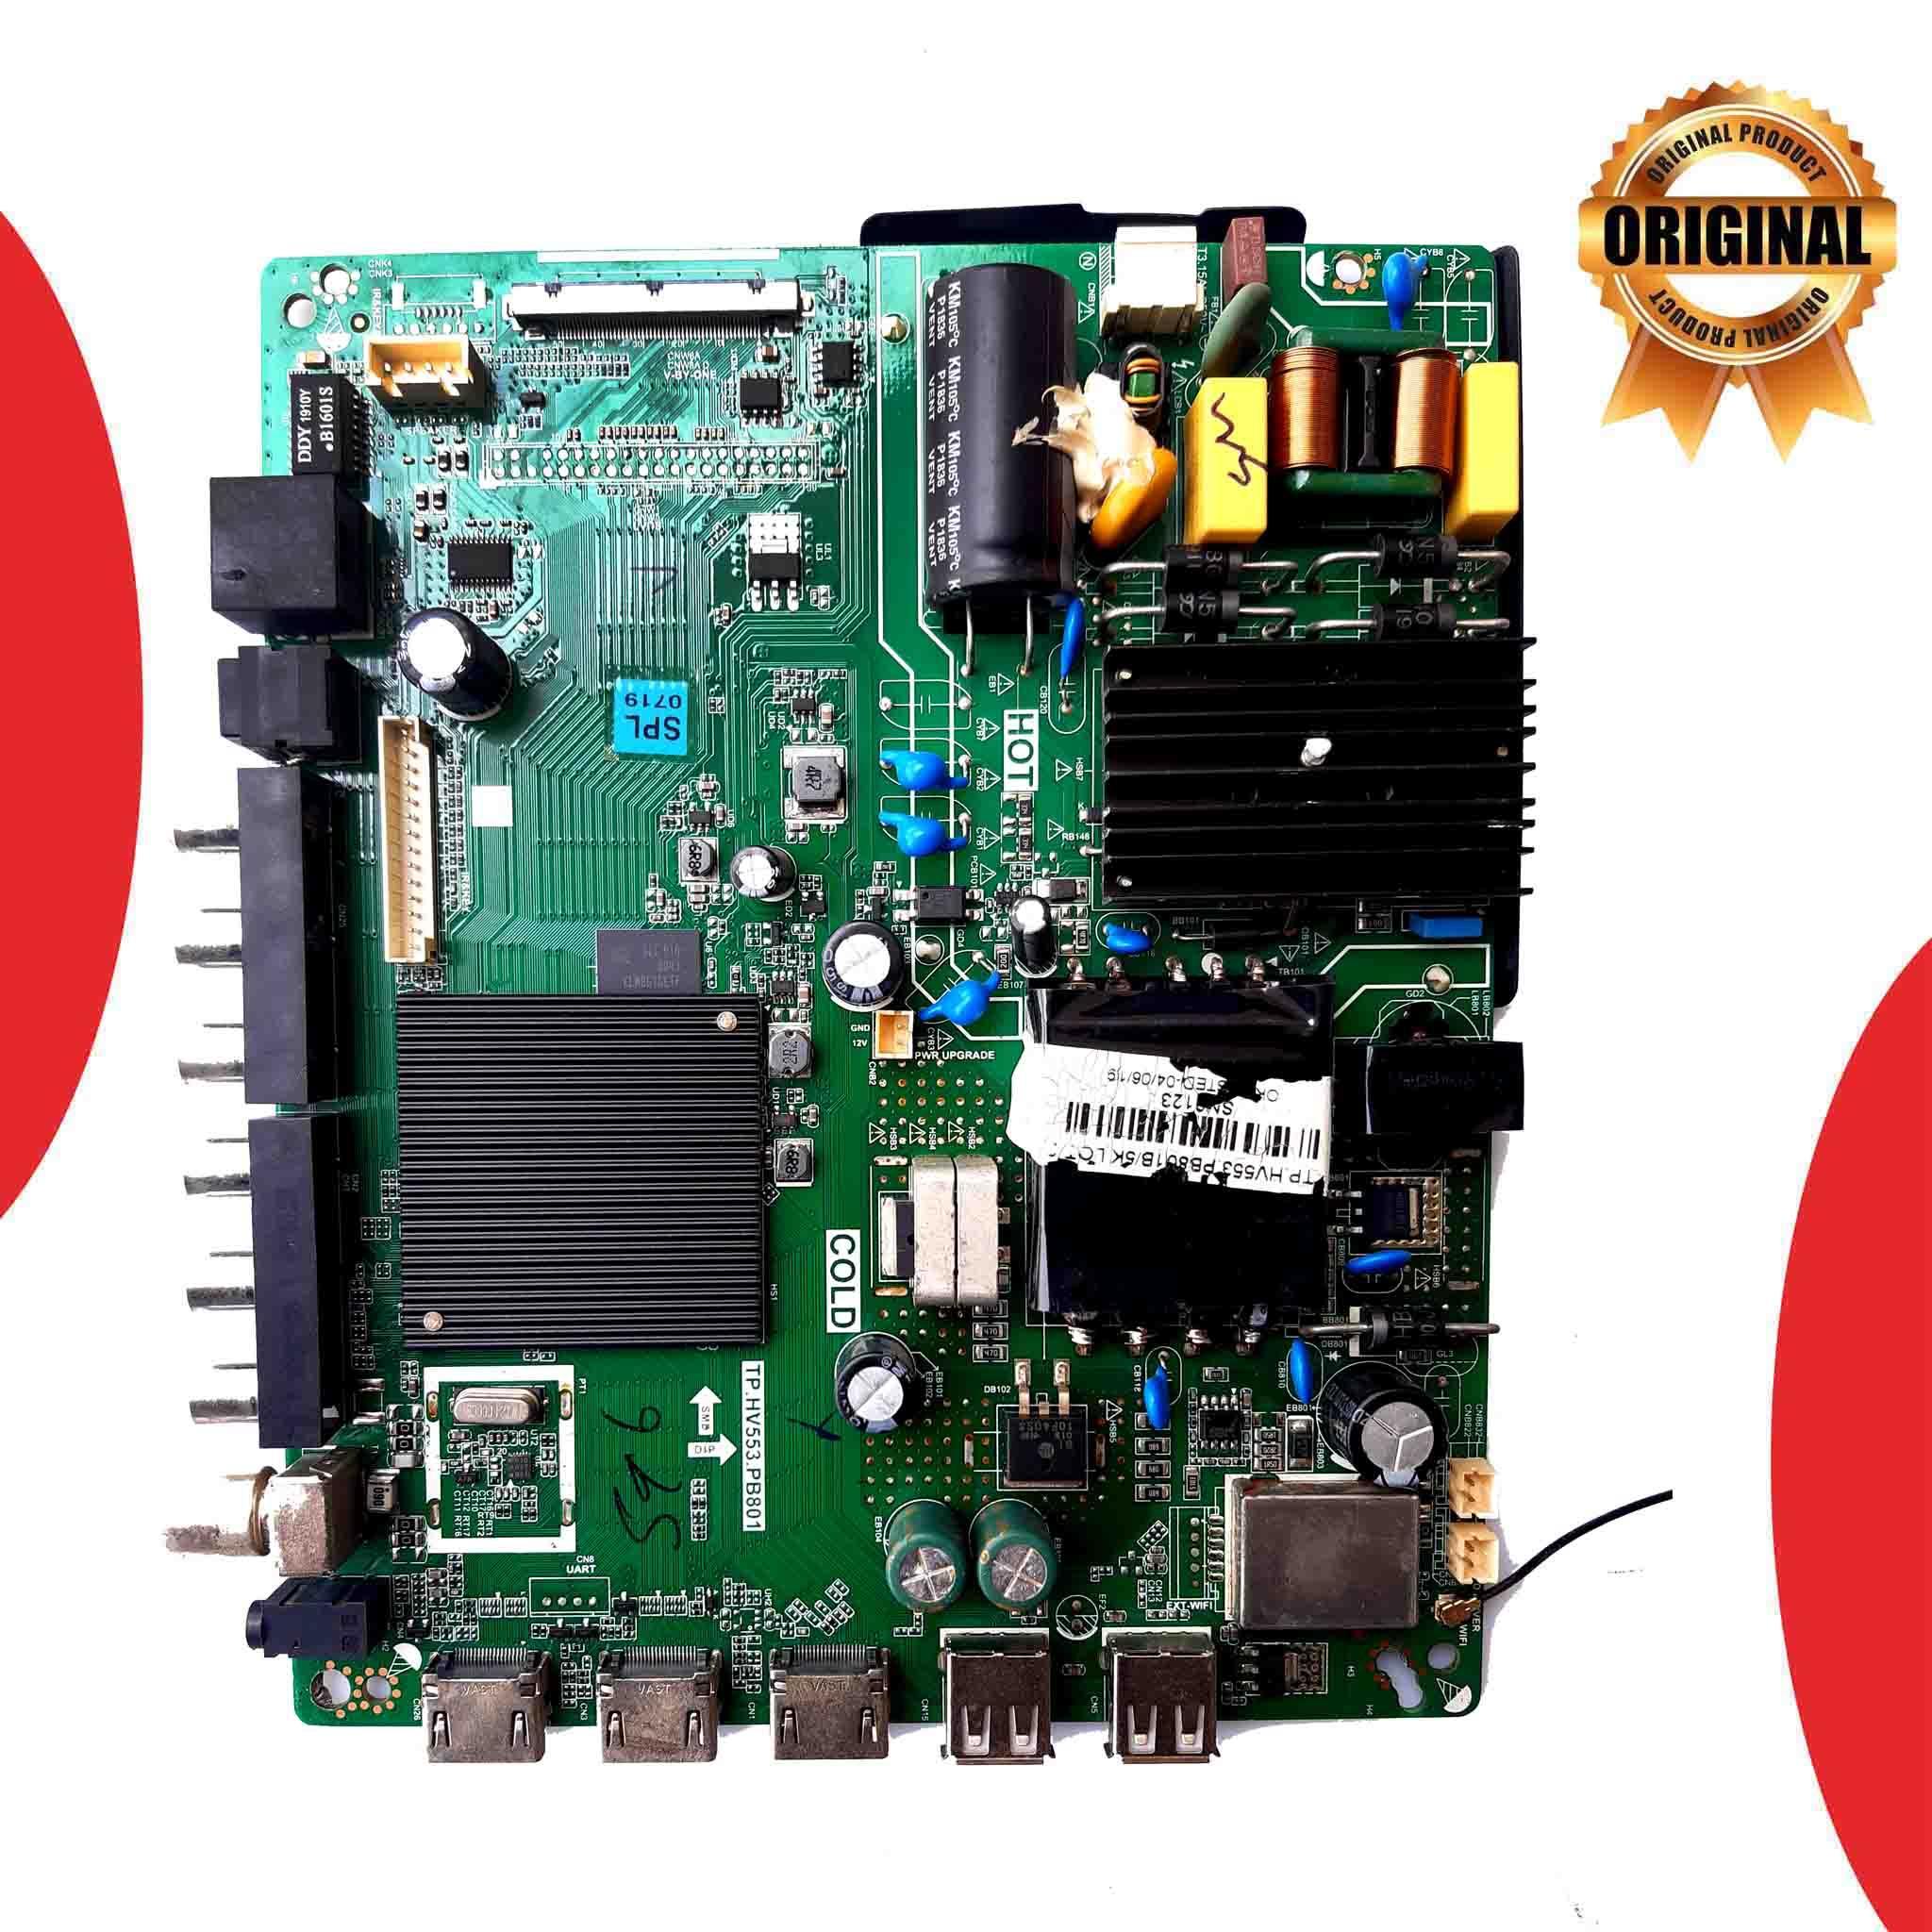 Model 40TH1000 Thomson LED TV Motherboard - Great Bharat Electronics